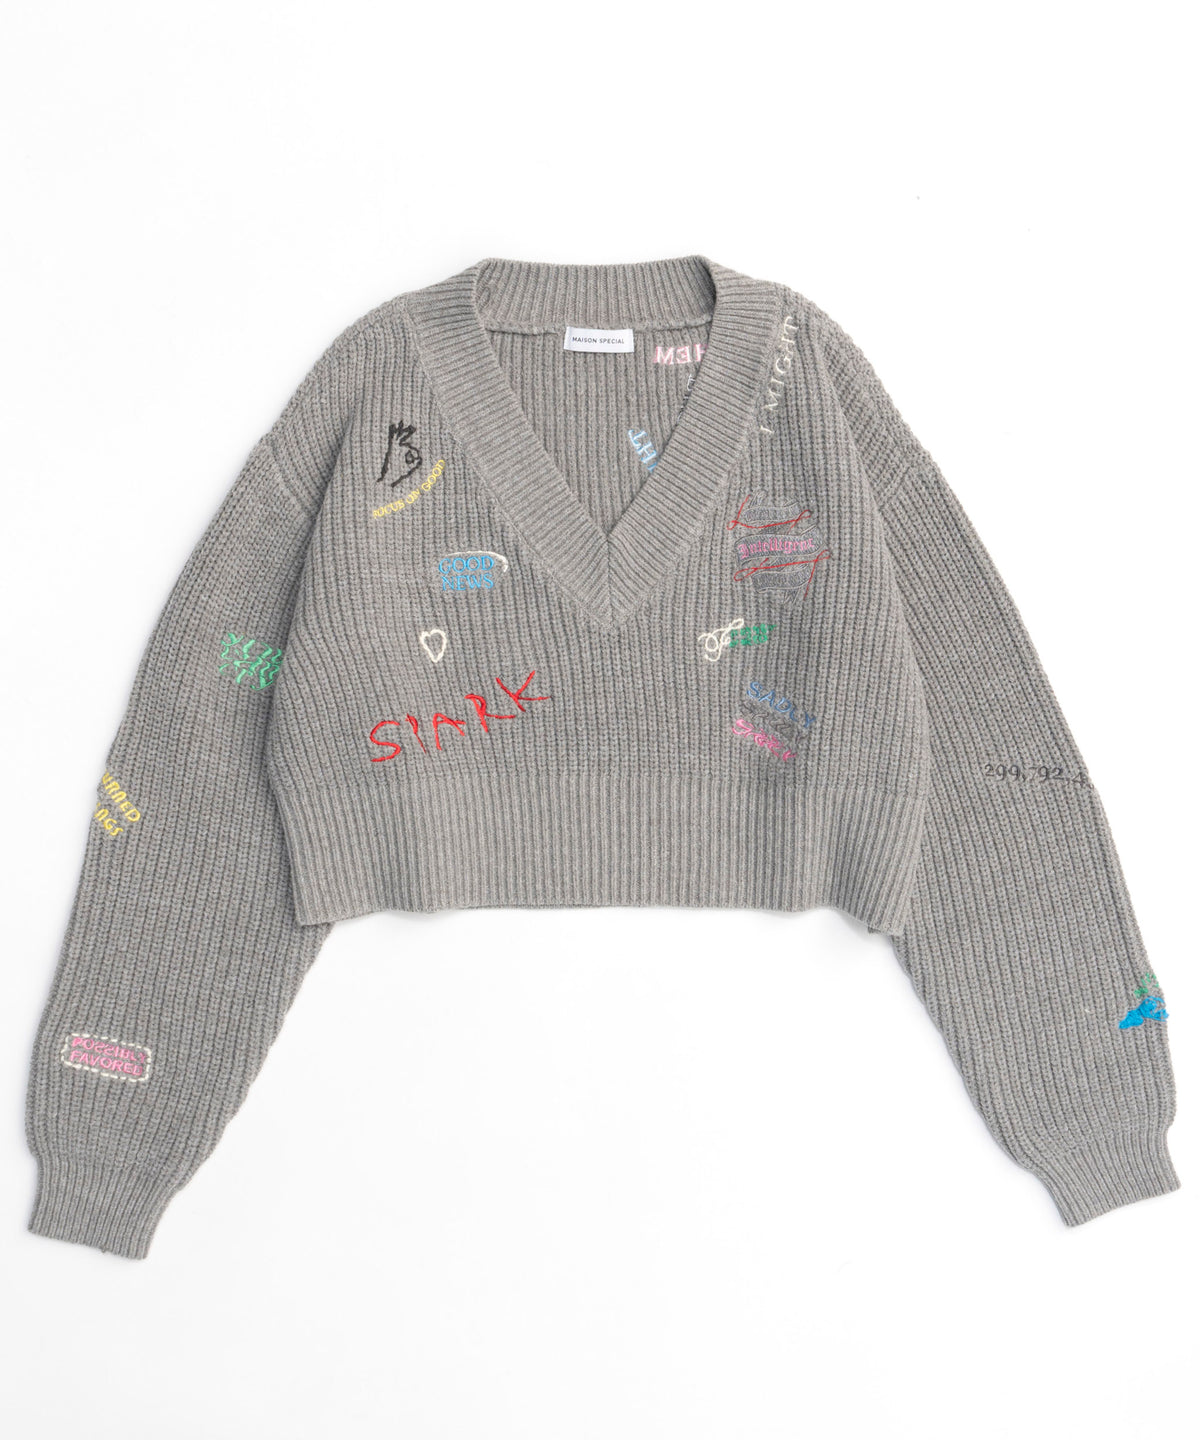 【24AUTUMN PRE-ORDER】V-neck Embroidery Knitwear